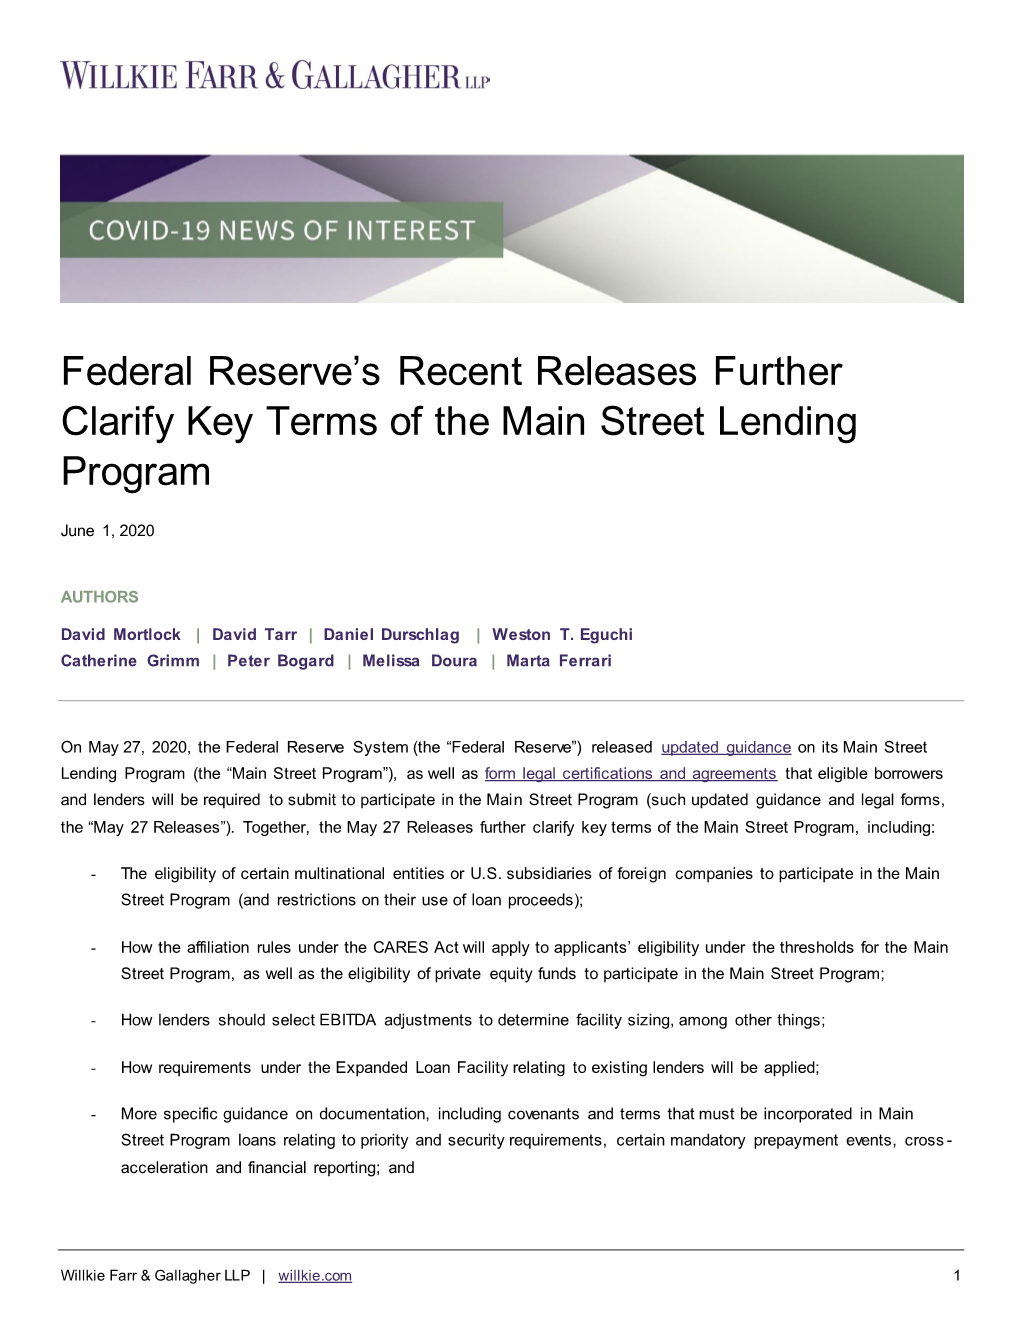 Federal Reserve's Recent Releases Further Clarify Key Terms of The